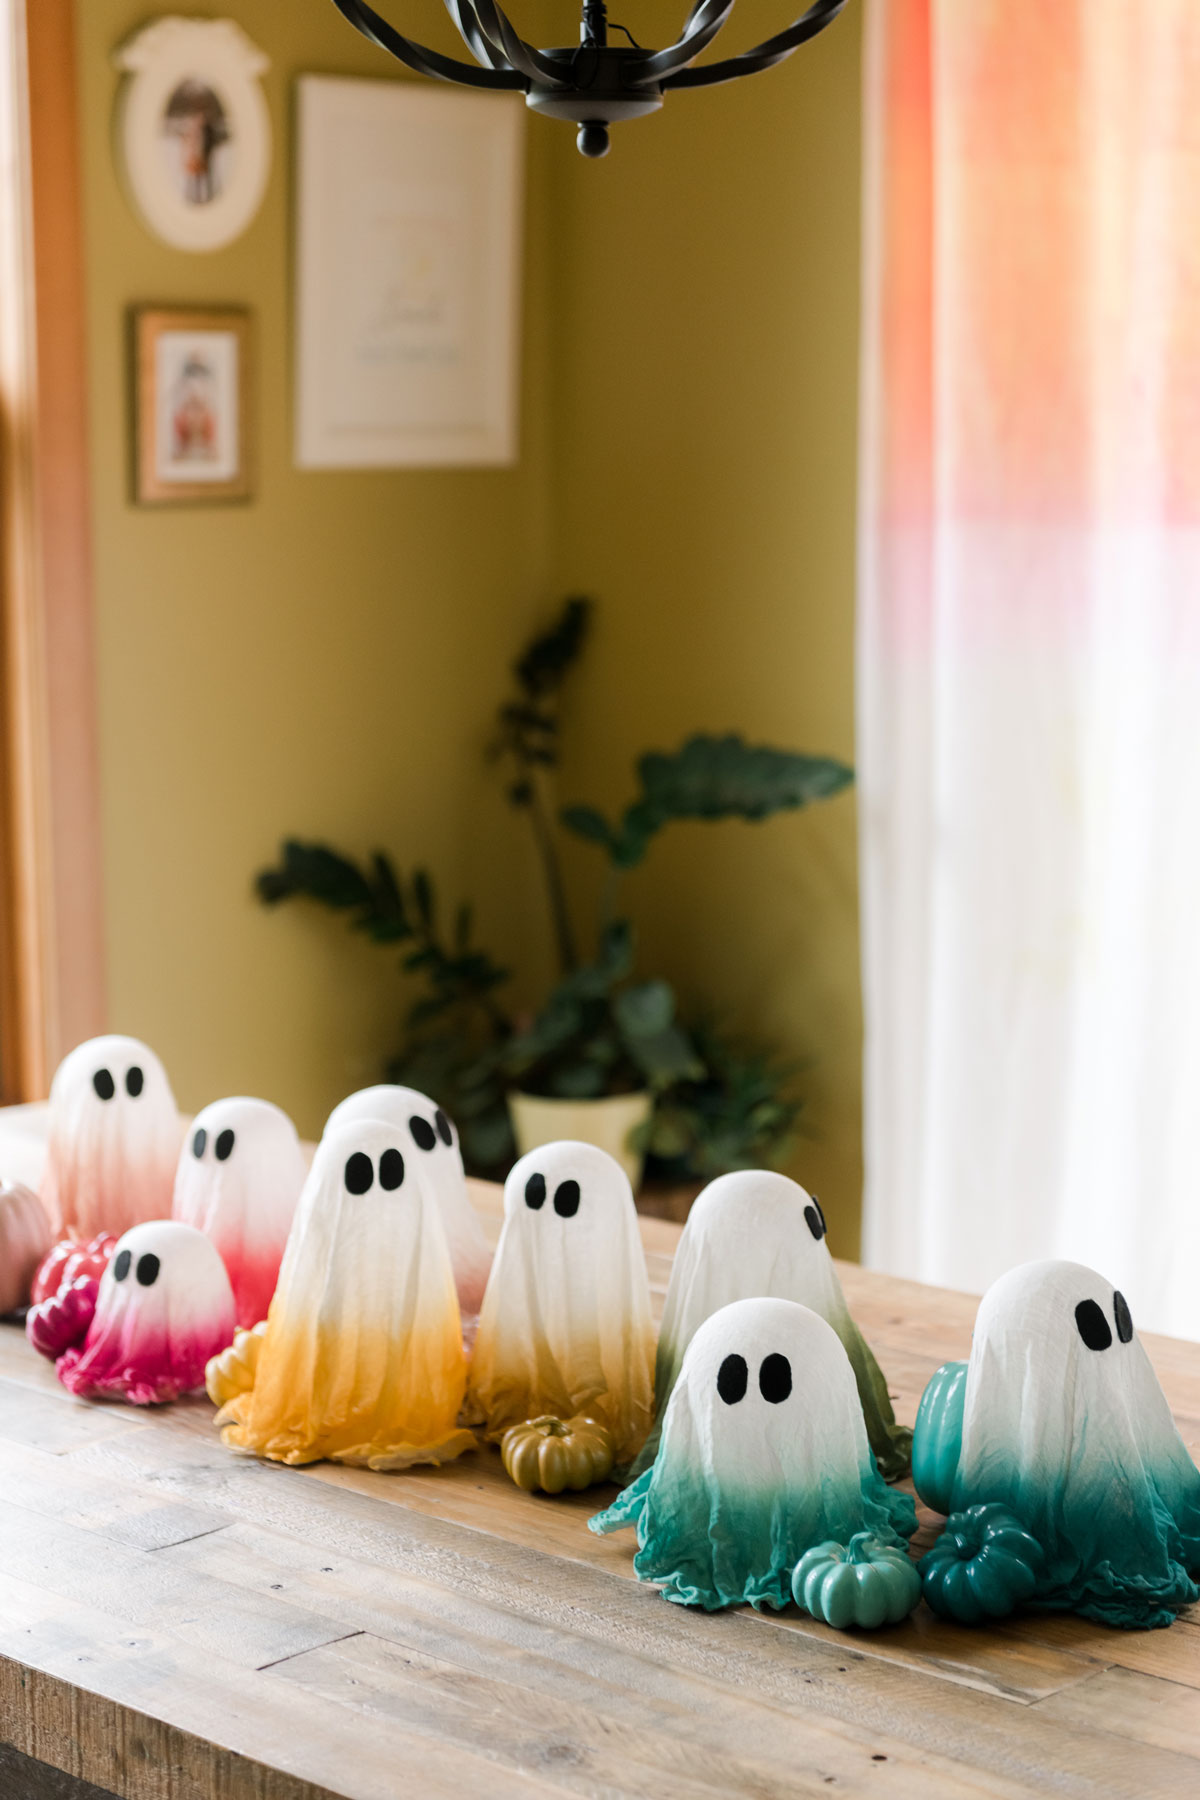 Colorful cheesecloth ghosts, rainbow halloween decor ideas, rainbow halloween decor, colorful rainbow decor for halloween, colorful halloween ghosts, rainbow ghosts for halloween